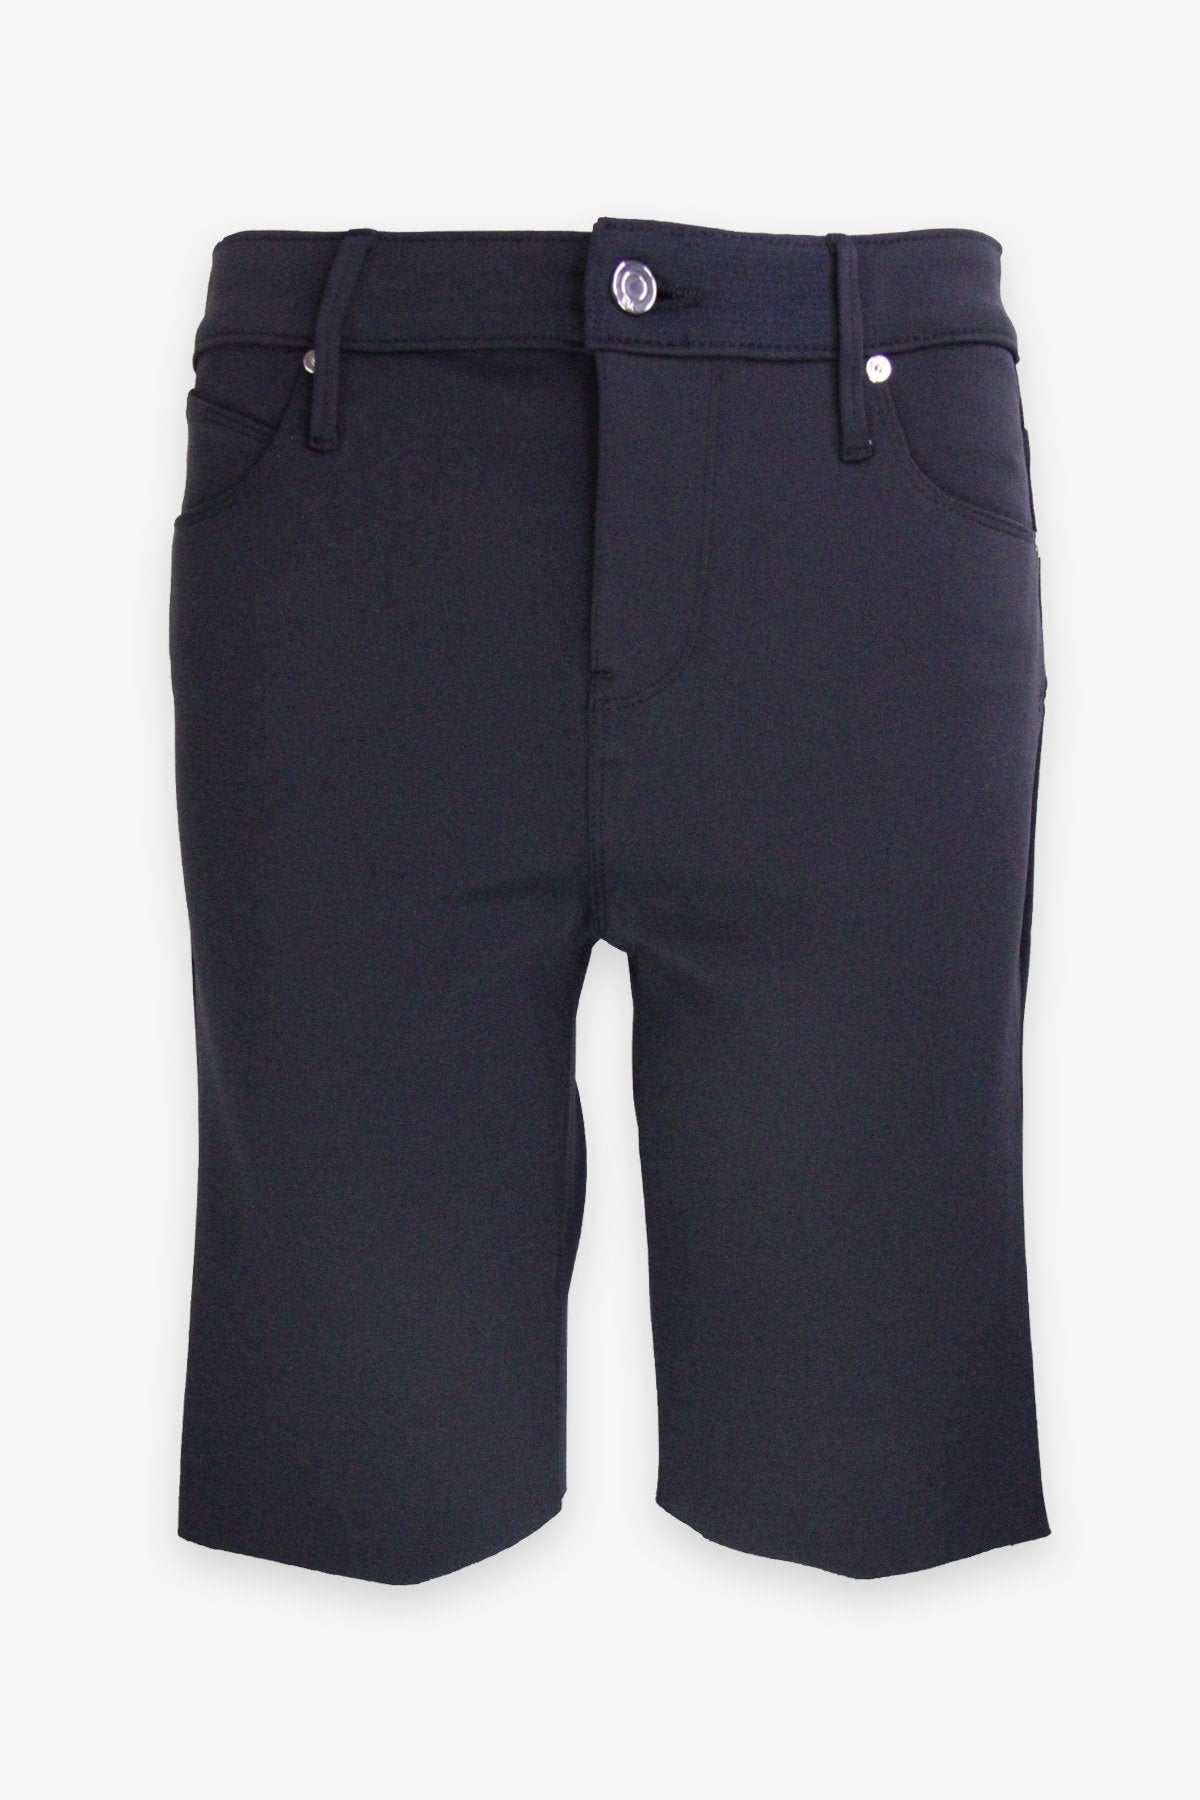 Toure Cycle Short in Navy - shop-olivia.com